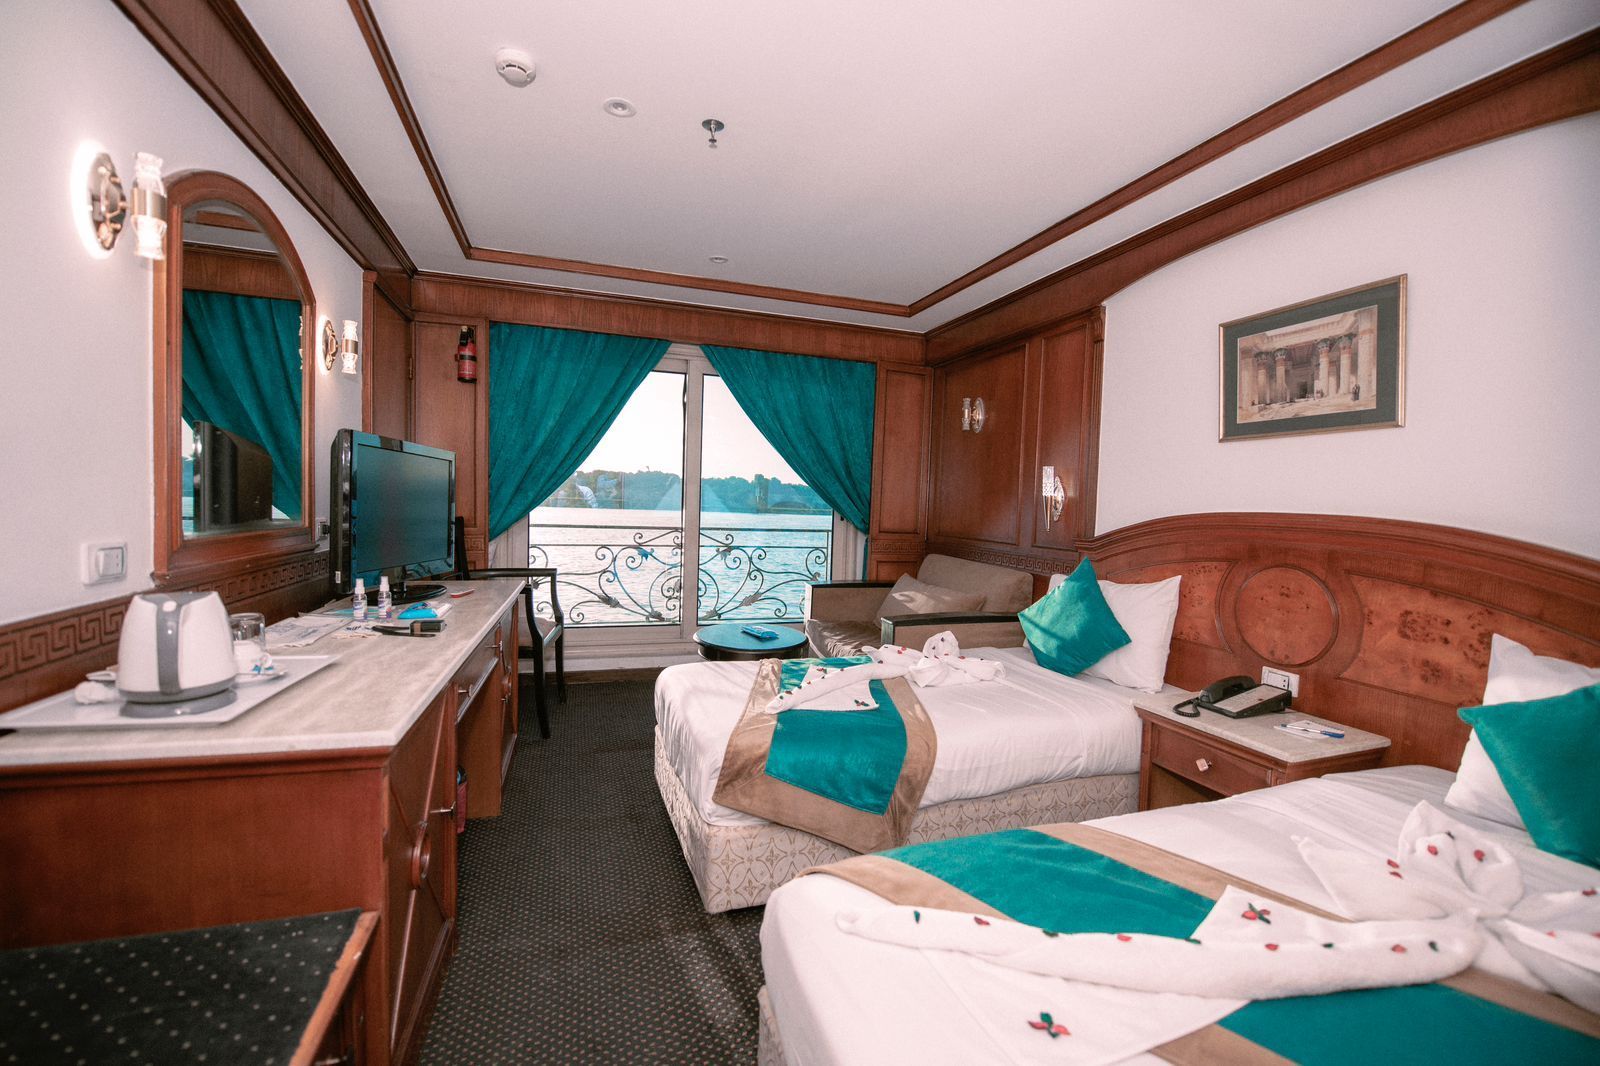 double cabin, Cruise deluxe on the Nile, Nile View, Cruise Nile Egypt, Luxor, Aswan, Travel egypt, travel agency Egypt, Travel agency France, Nile River,